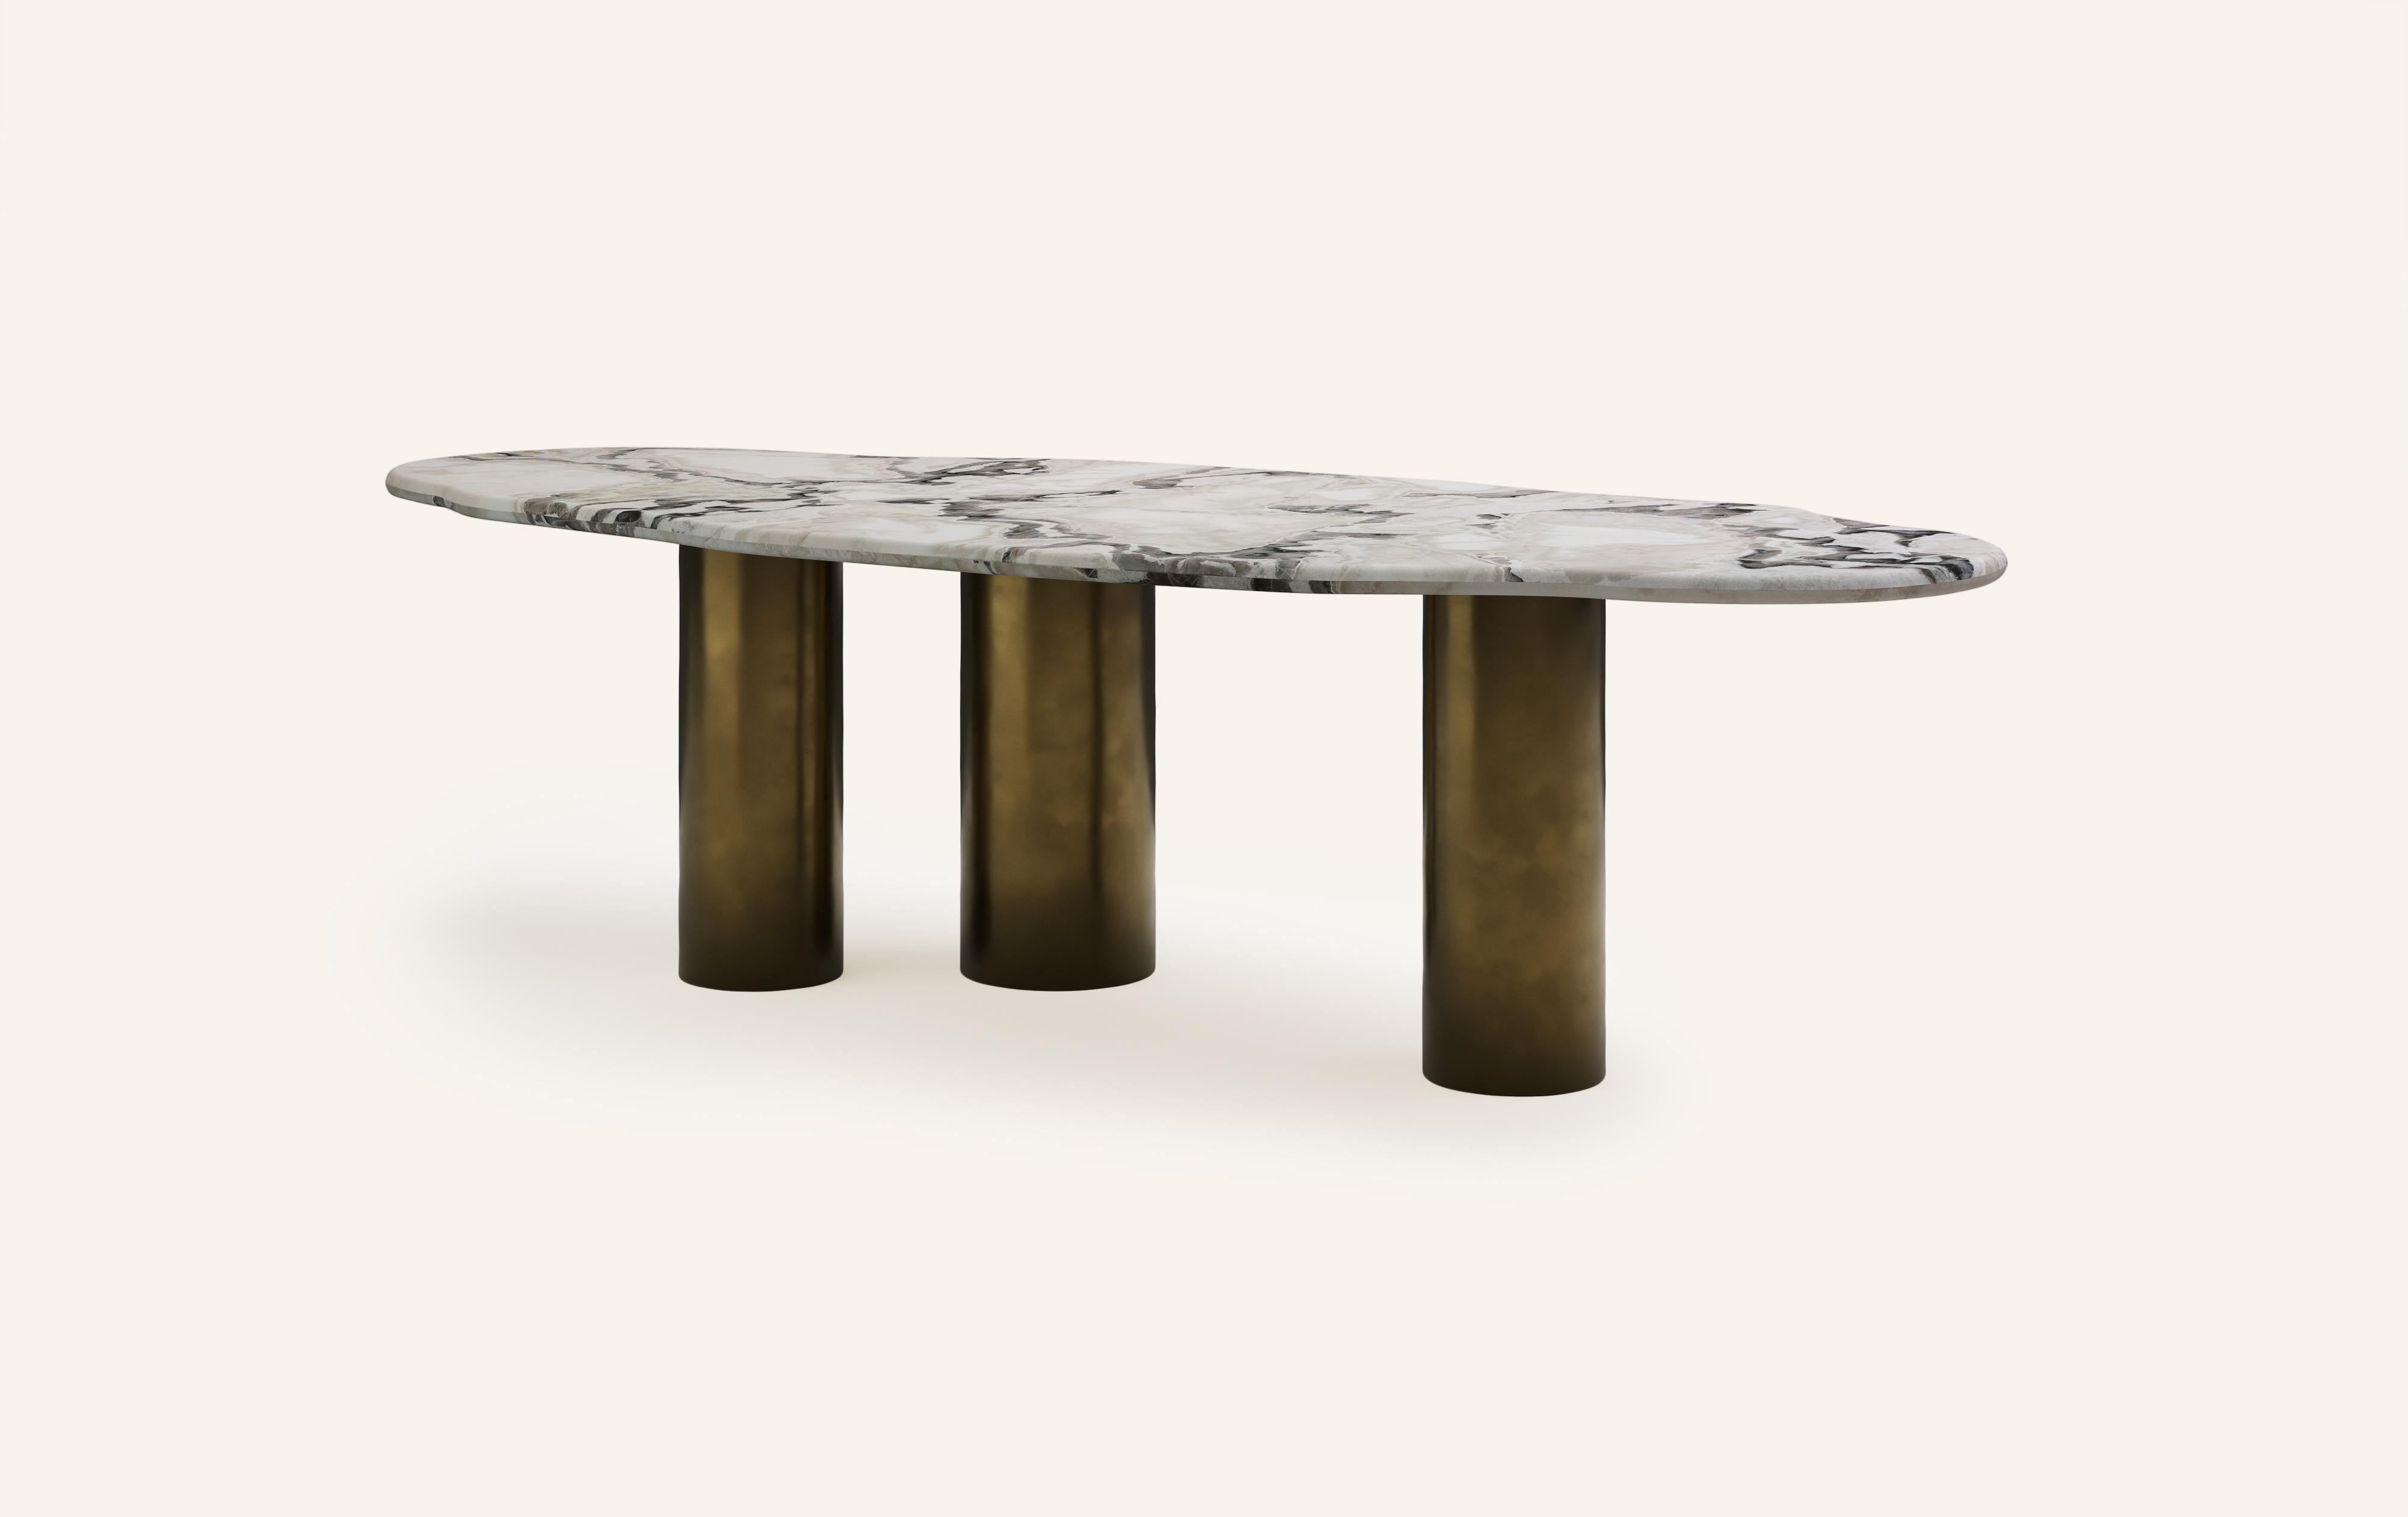 Organic Modern FORM(LA) Lago Freeform Dining Table 108”L x 48”W x 30”H Oyster Marble & Bronze For Sale